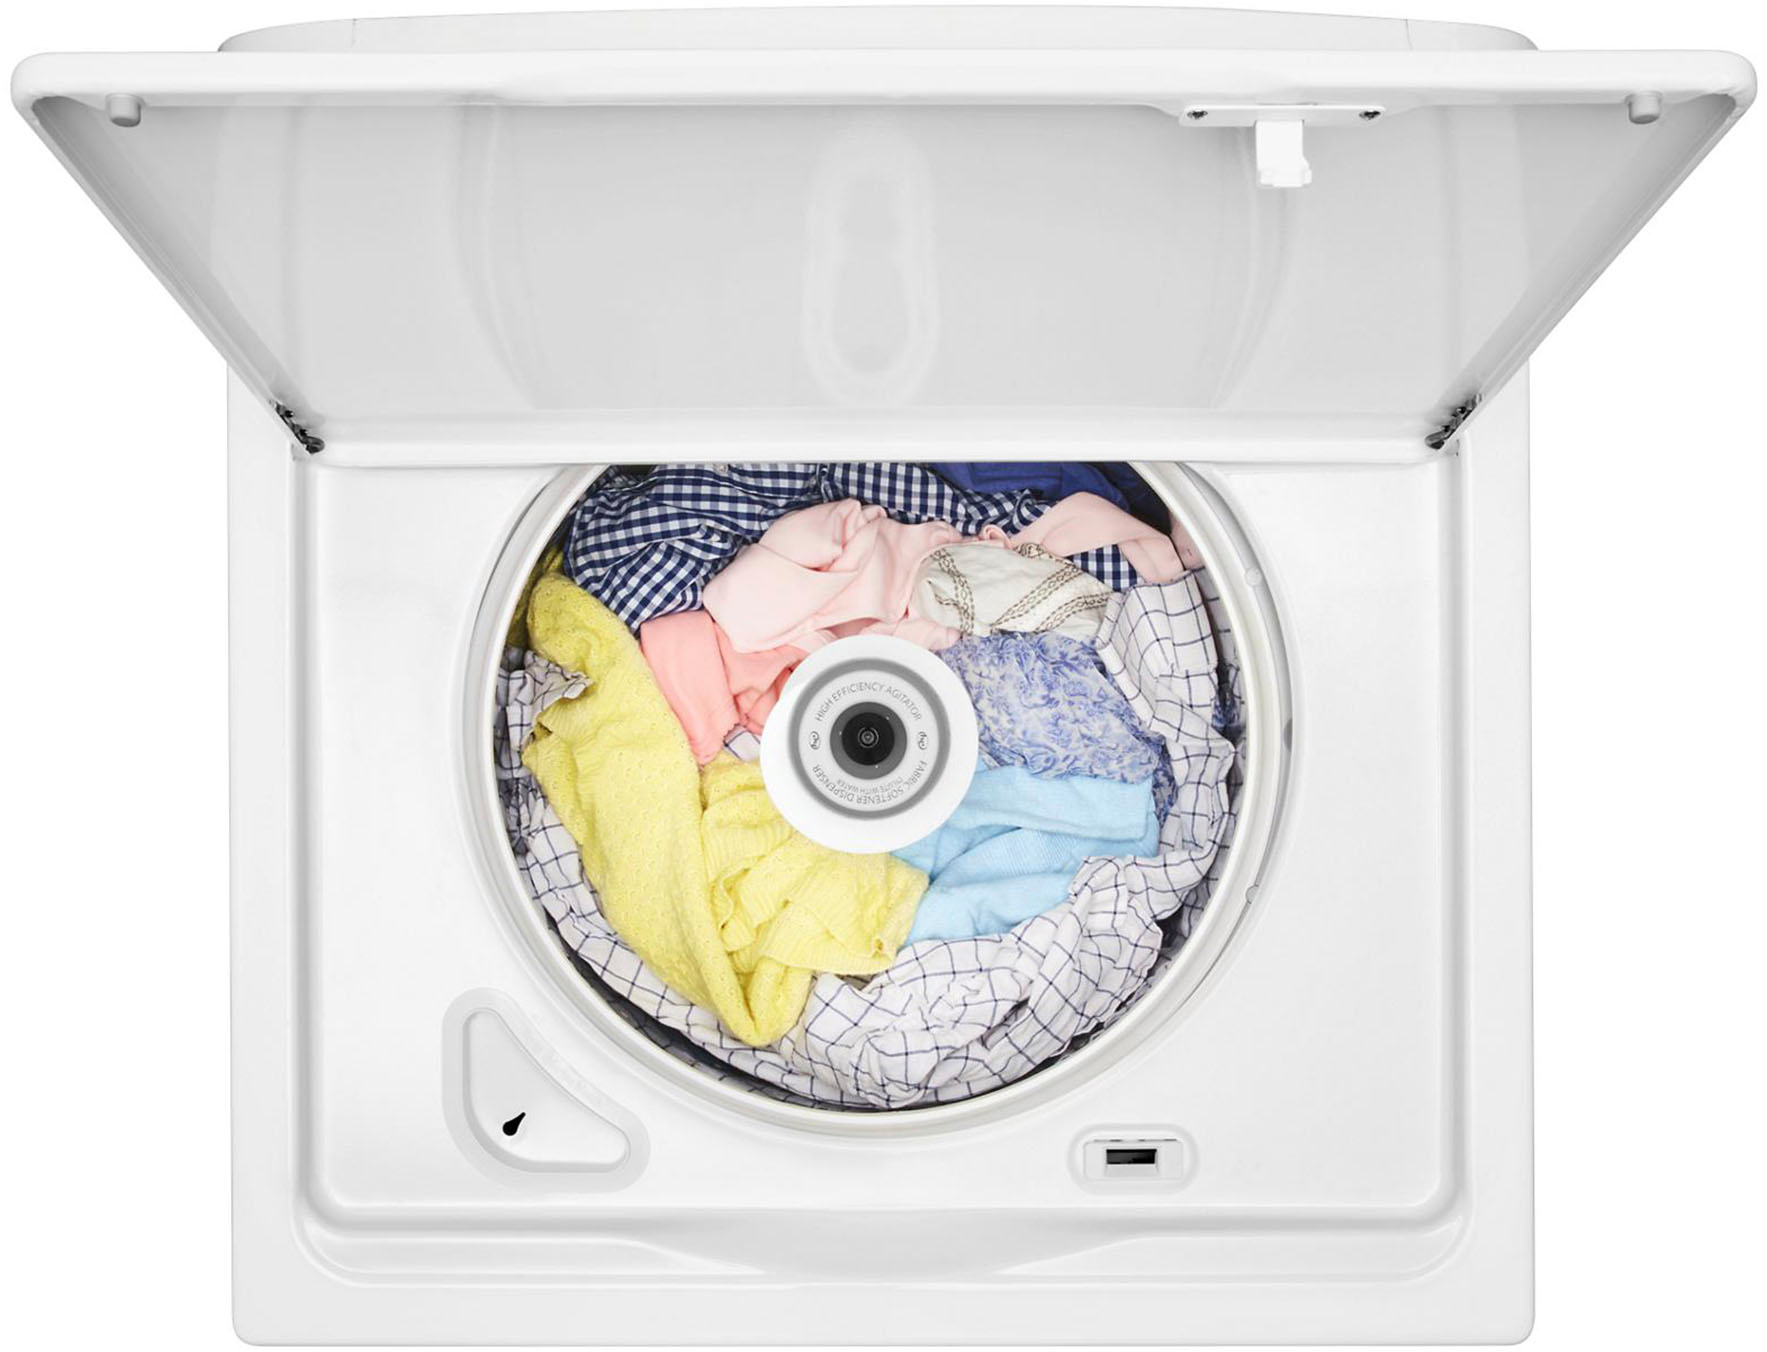 Left View: Whirlpool - 3.8 Cu. Ft. High Efficiency Top Load Washer with 360 Wash Agitator - White